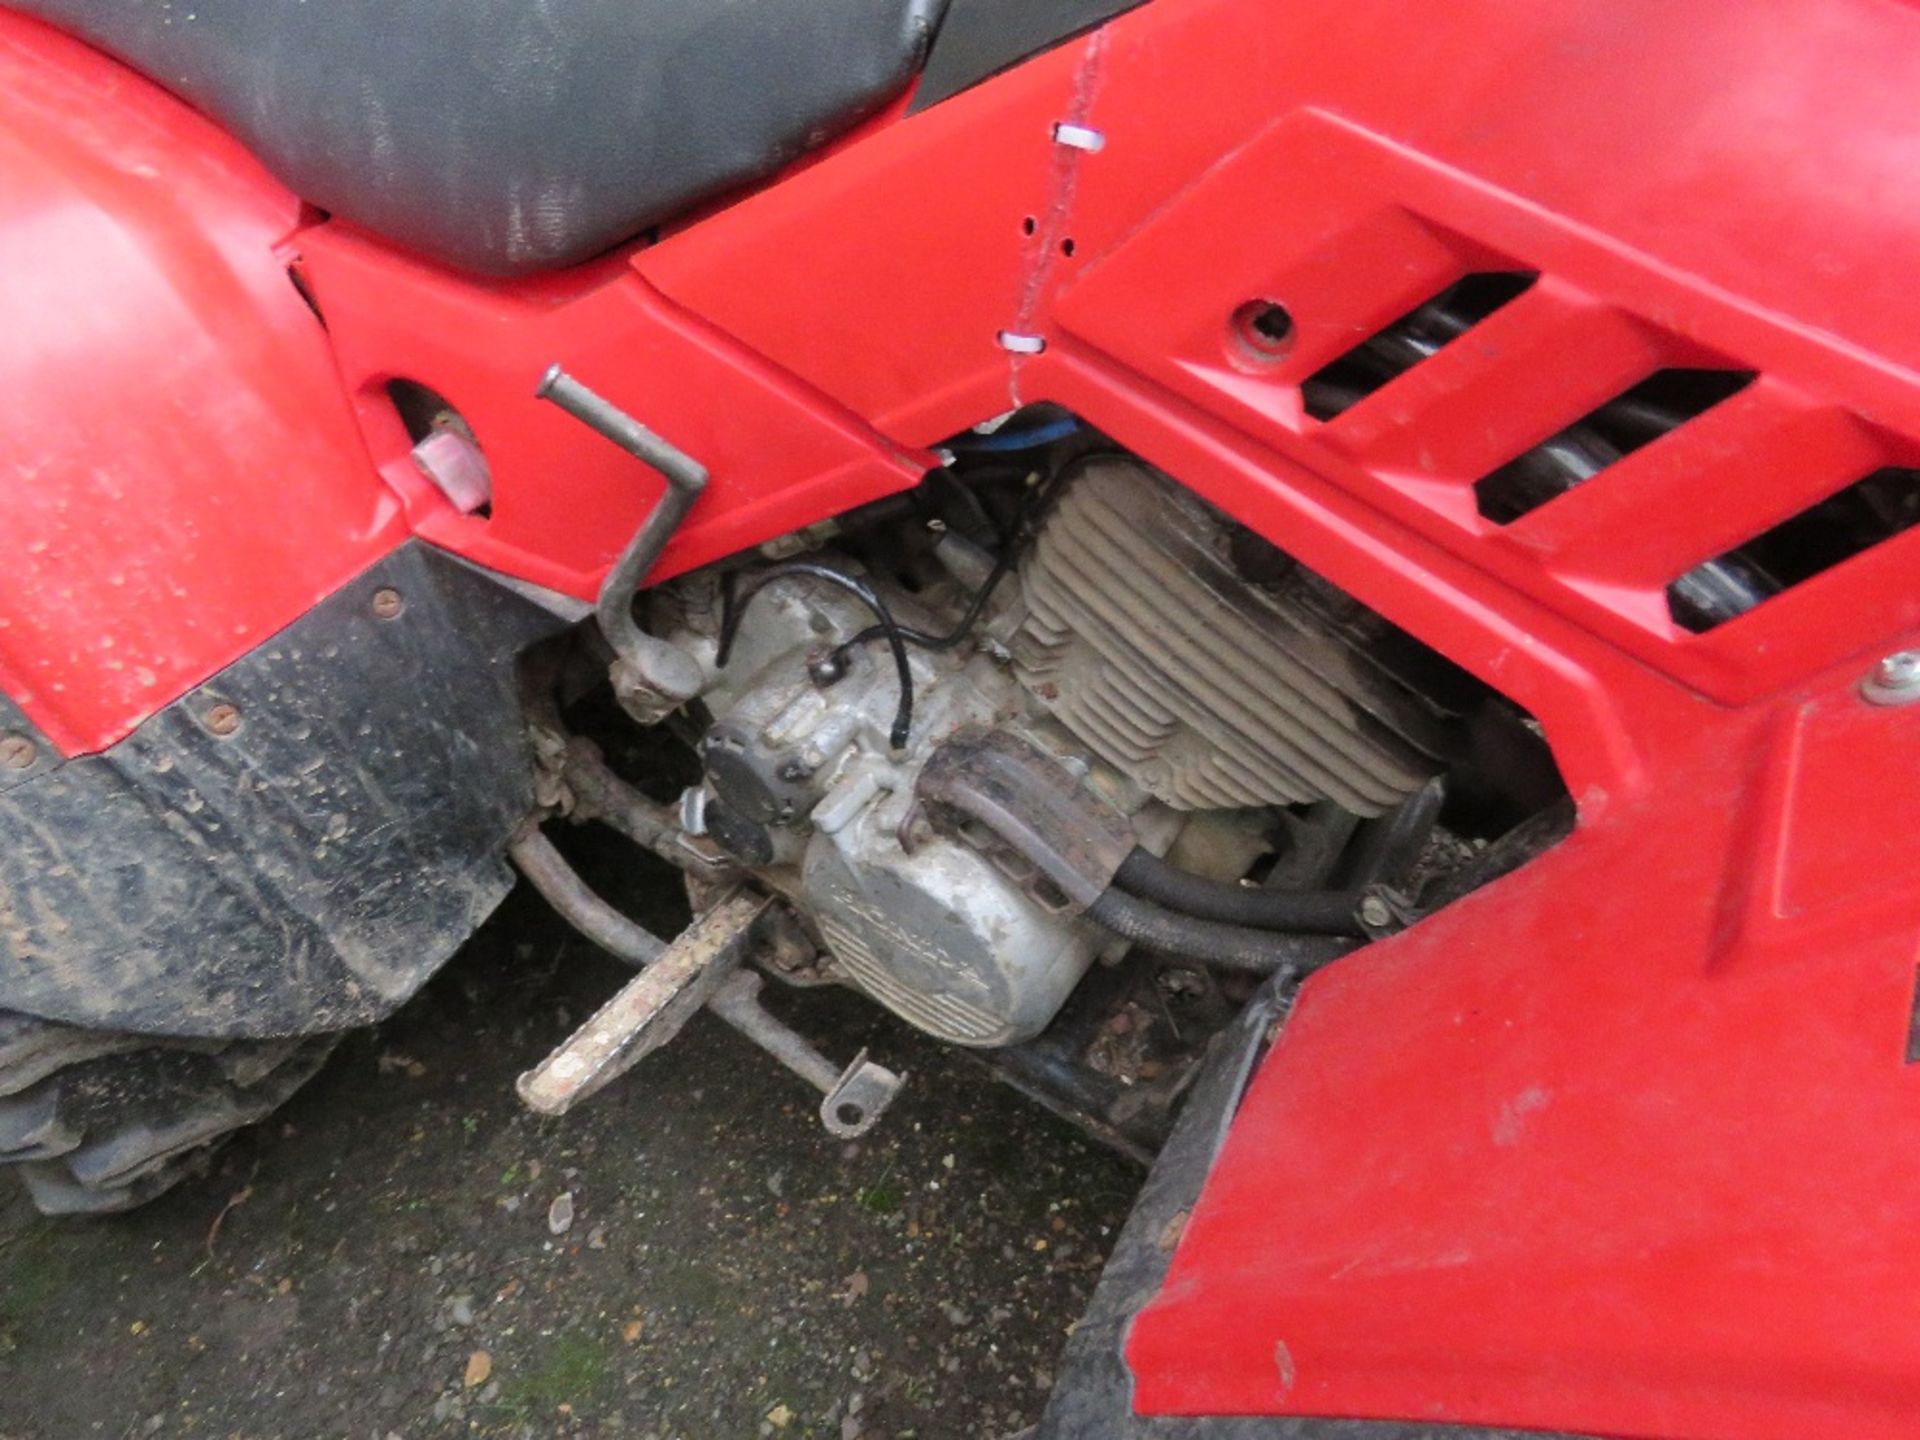 HONDA 2WD QUAD BIKE, RECENT TYRE REPLACEMENT. WHEN TESTED WAS SEEN TO START, DRIVE AND STEER, BRAKES - Image 5 of 8